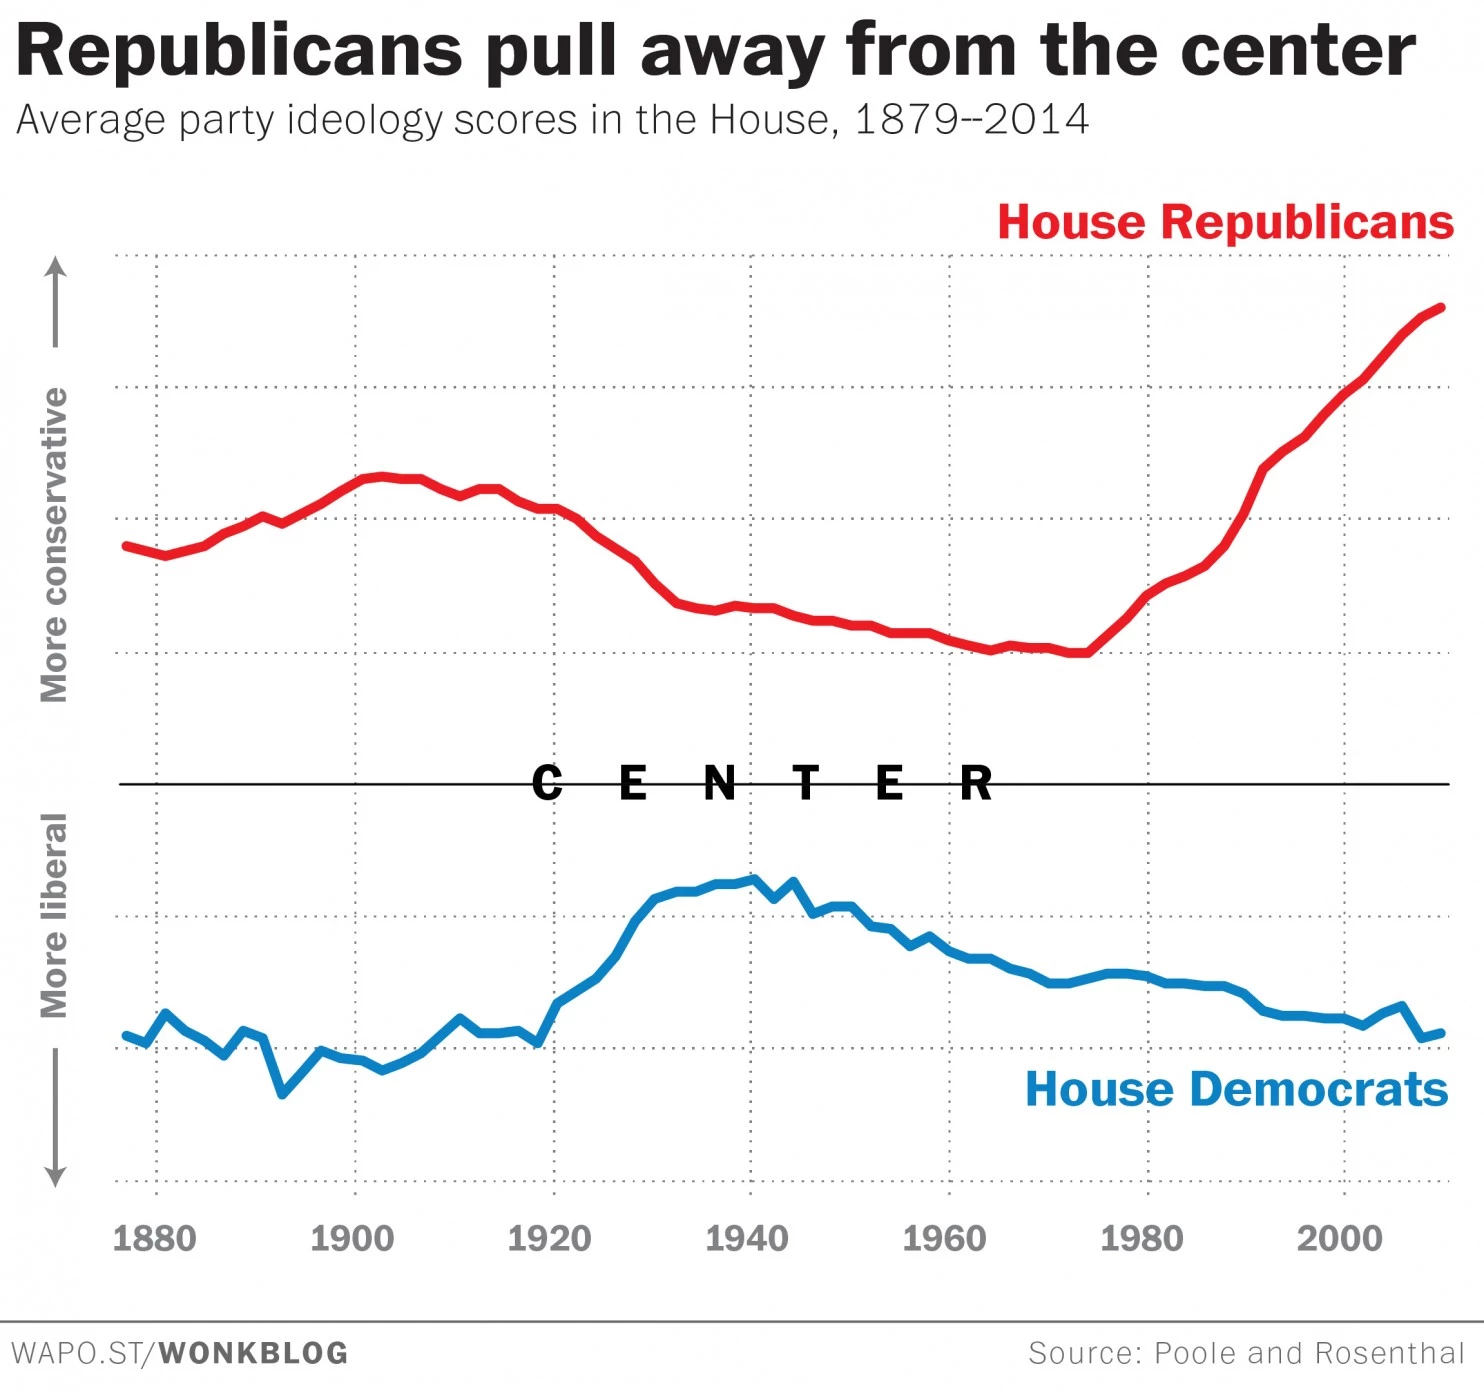 Republicans pull away from the center